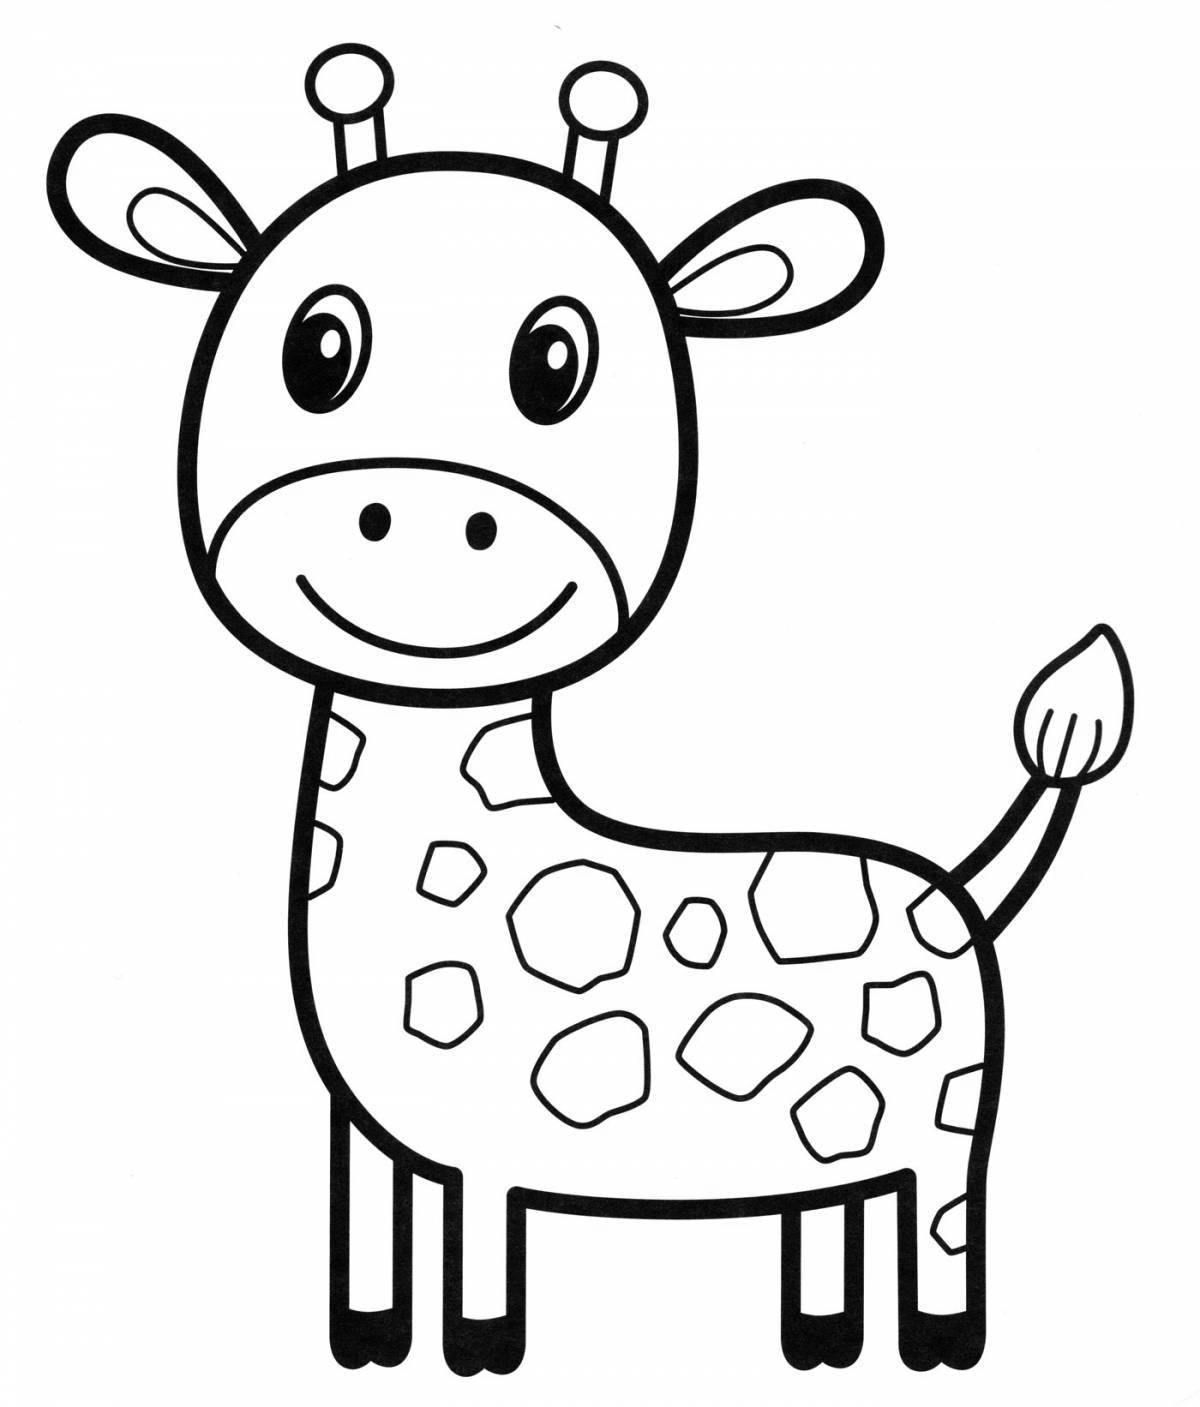 Coloring page dazzling giraffe for children 3-4 years old